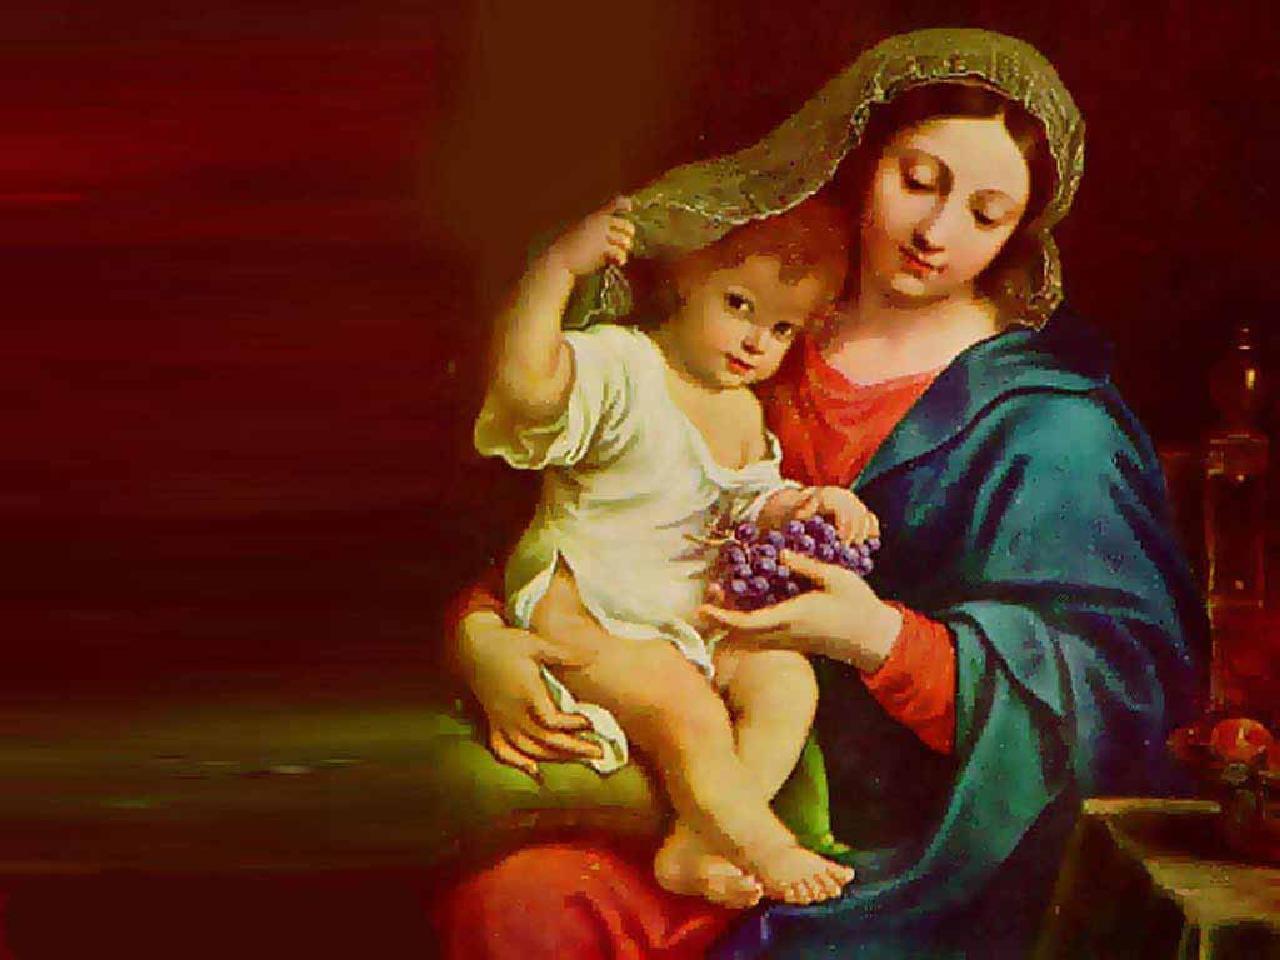 mother mary with baby jesus christ wallpaper picture Download